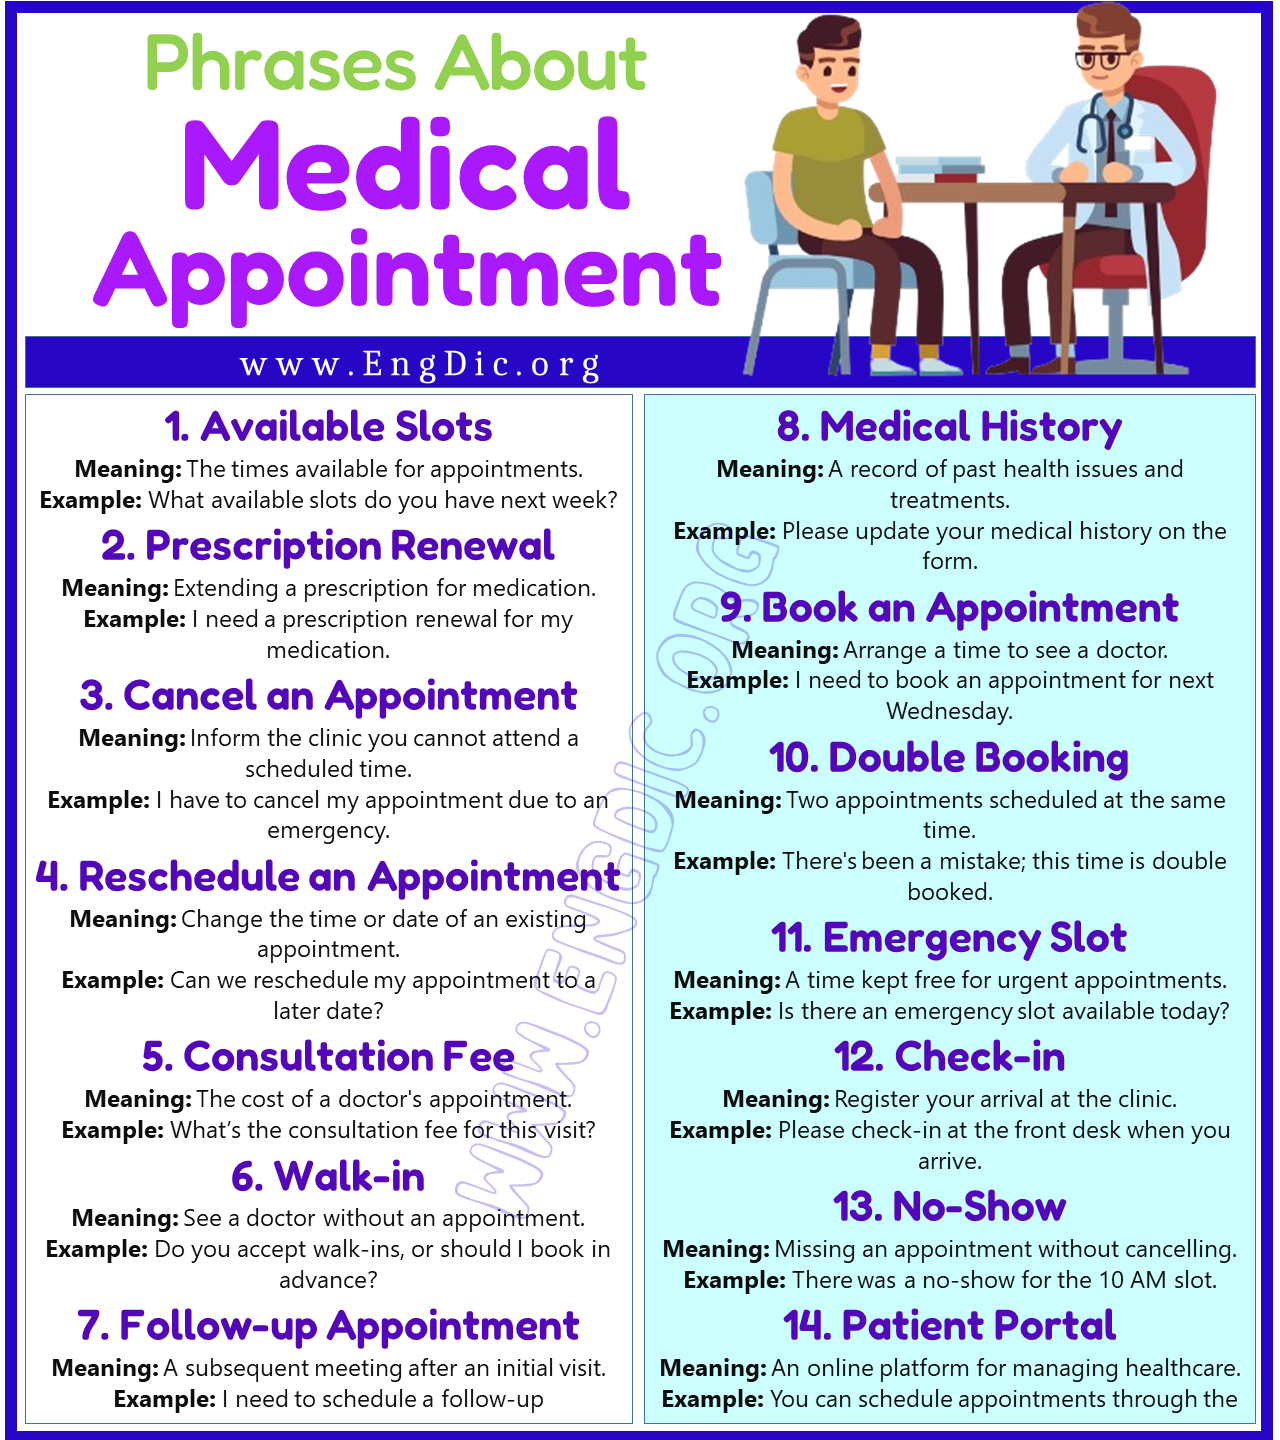 Phrases about Medical Appointments